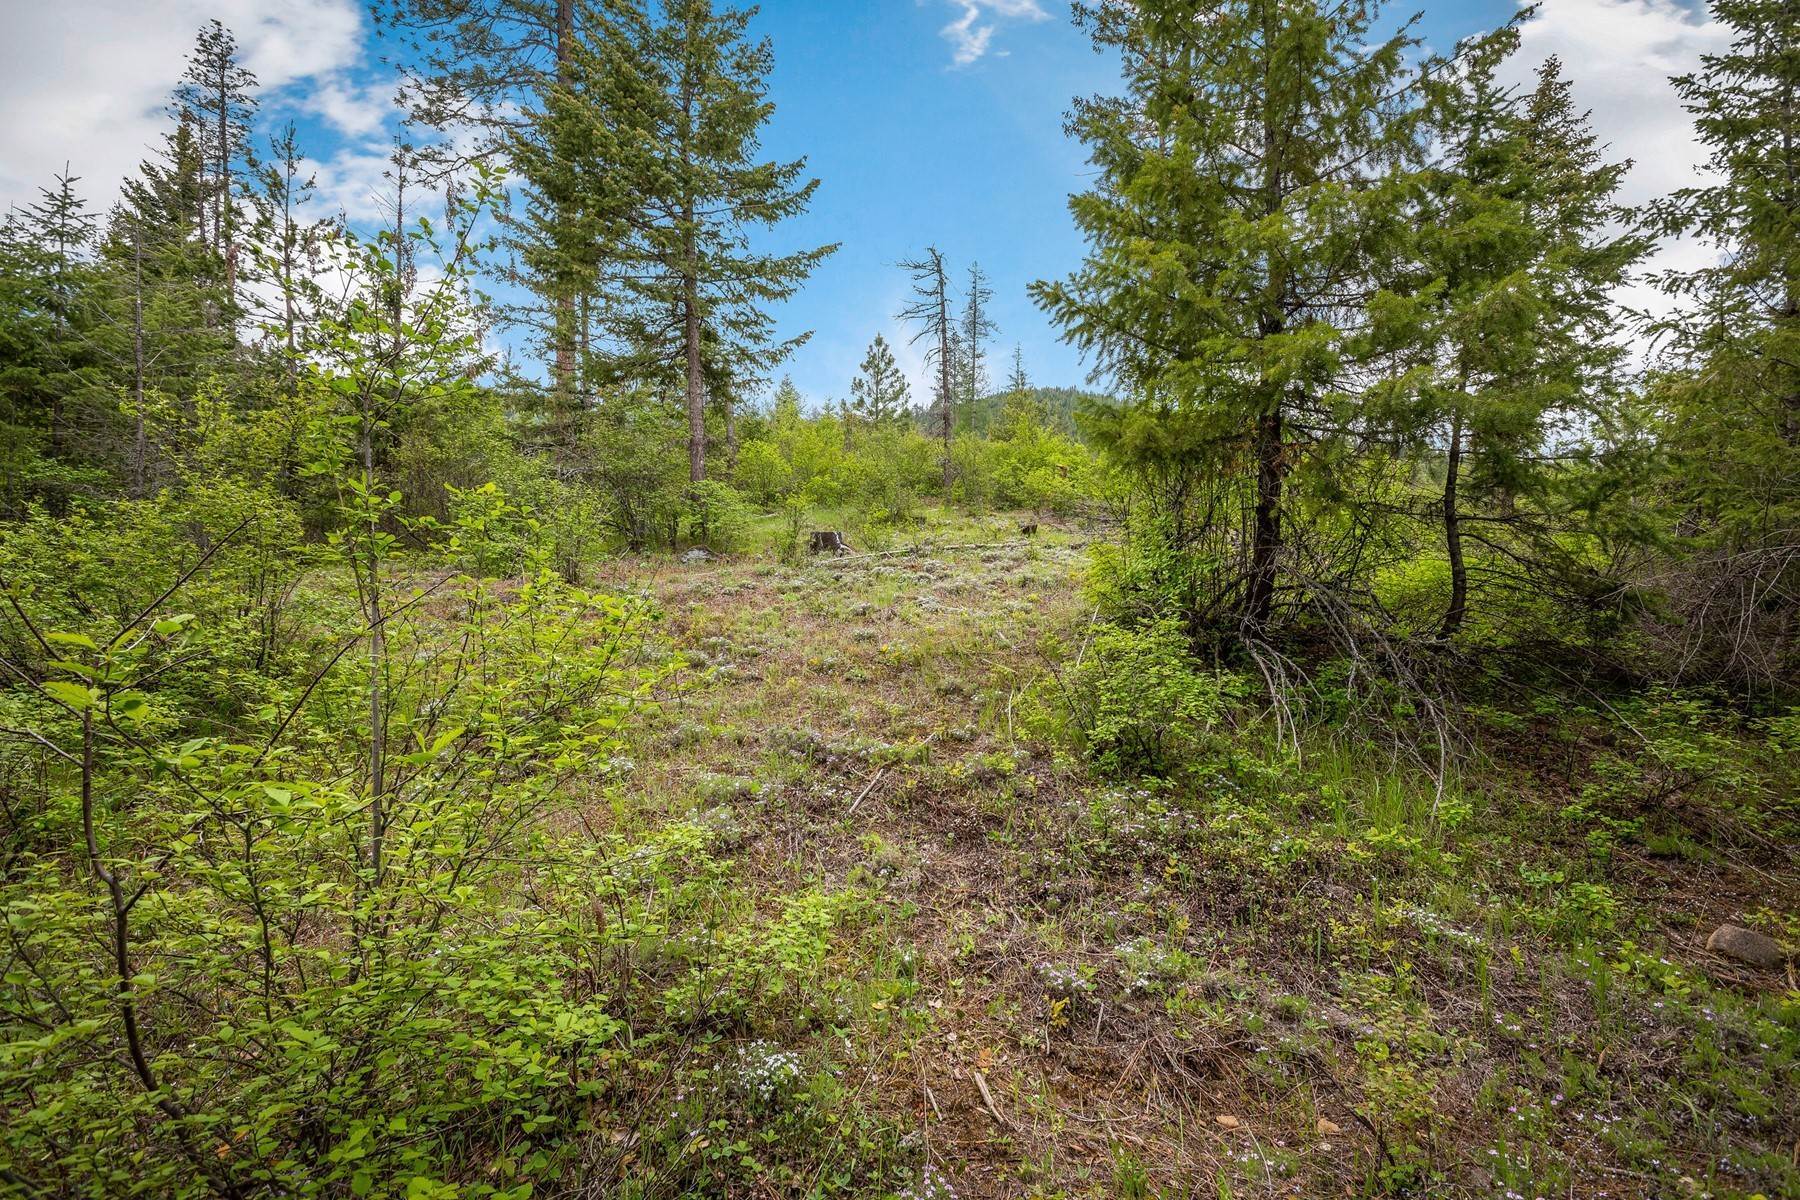 25. Land for Sale at Pend Oreille River Views 5 Acres Creek 1000 Morning Star Mtn Rd Priest River, Idaho 83856 United States